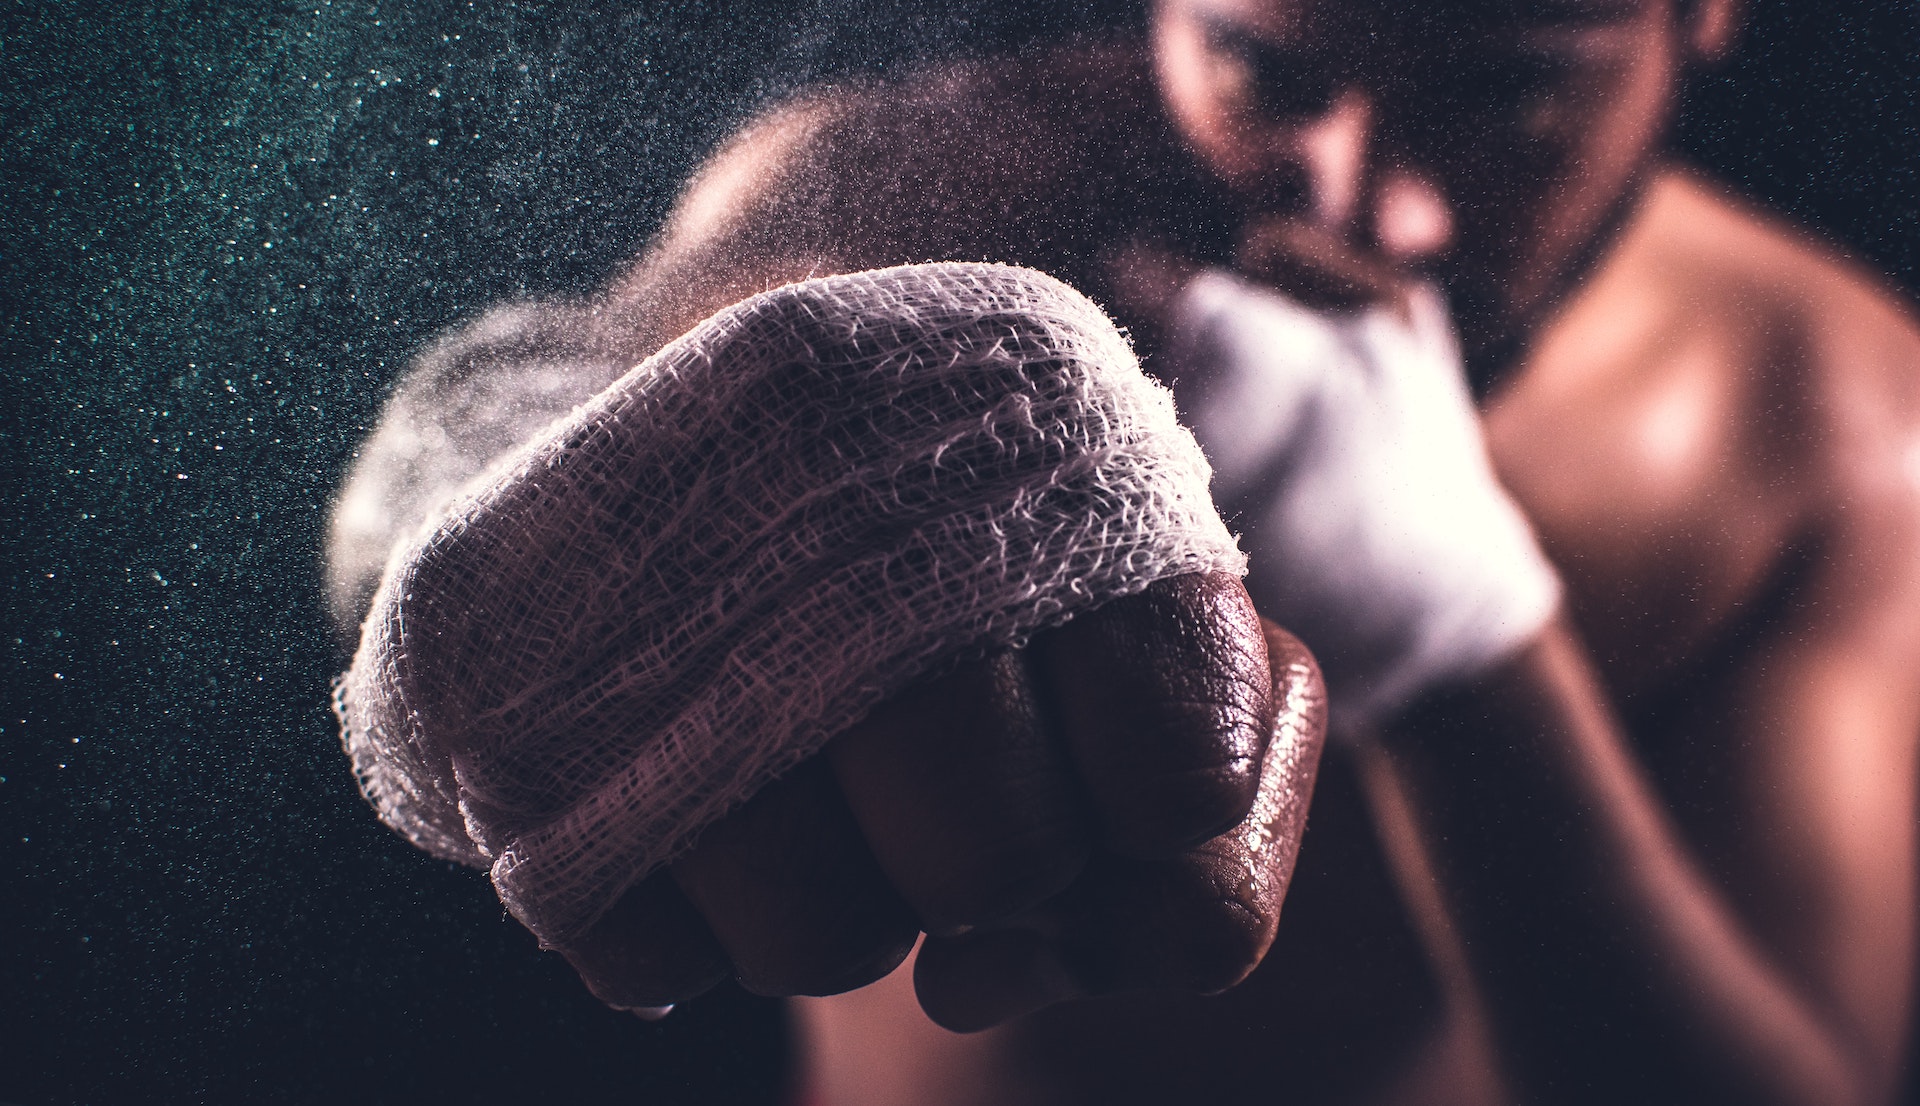 9 Reasons Why Boxing Is The Perfect Workout For Weight Loss